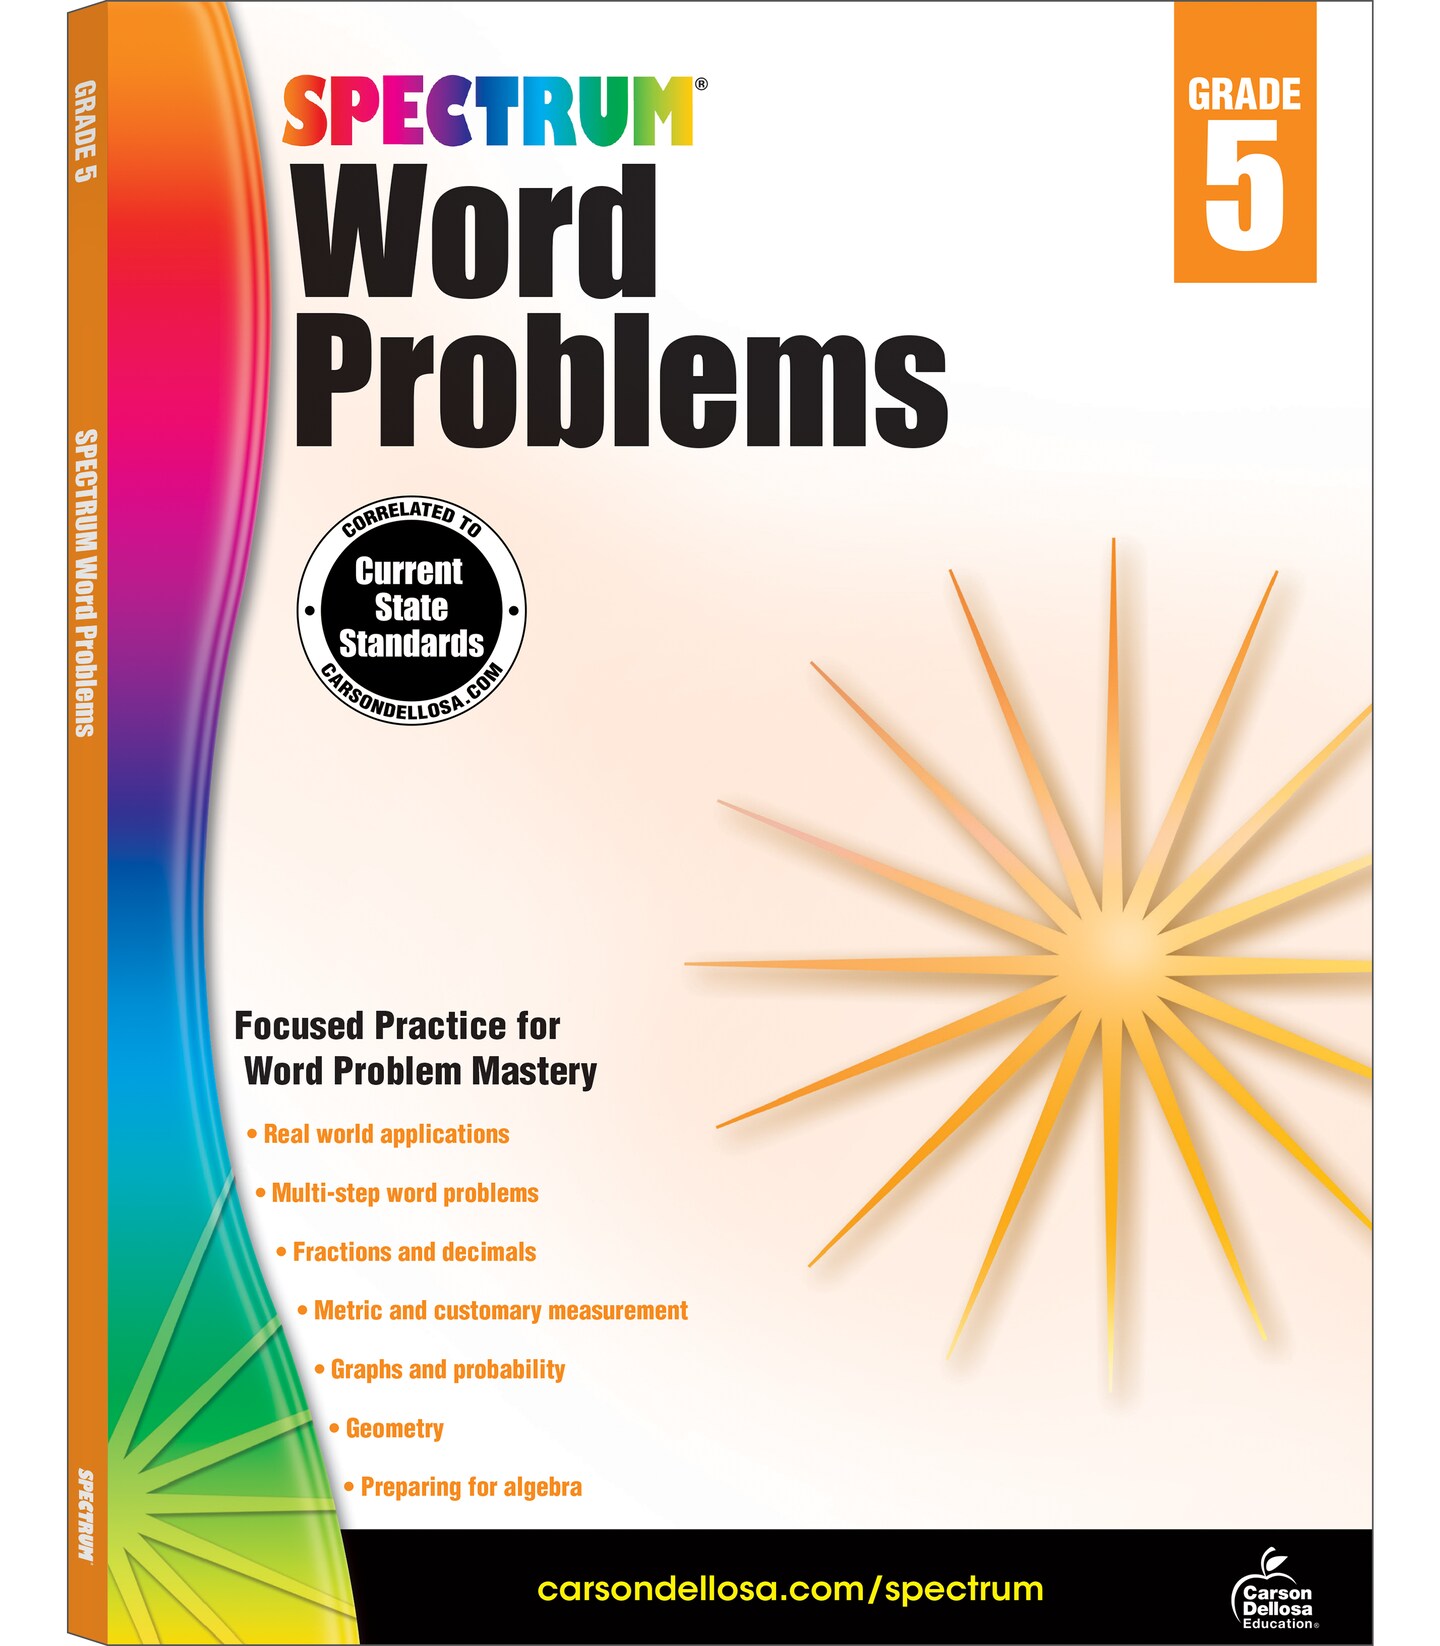 Spectrum Math Word Problems Grade 5 Workbook, Ages 10 to 11, 5th Grade Math Word Problems, Fractions, Decimals, Algebra Prep, Geometry, Multi-Step Word Problems, Graphs, and Probability - 128 Pages